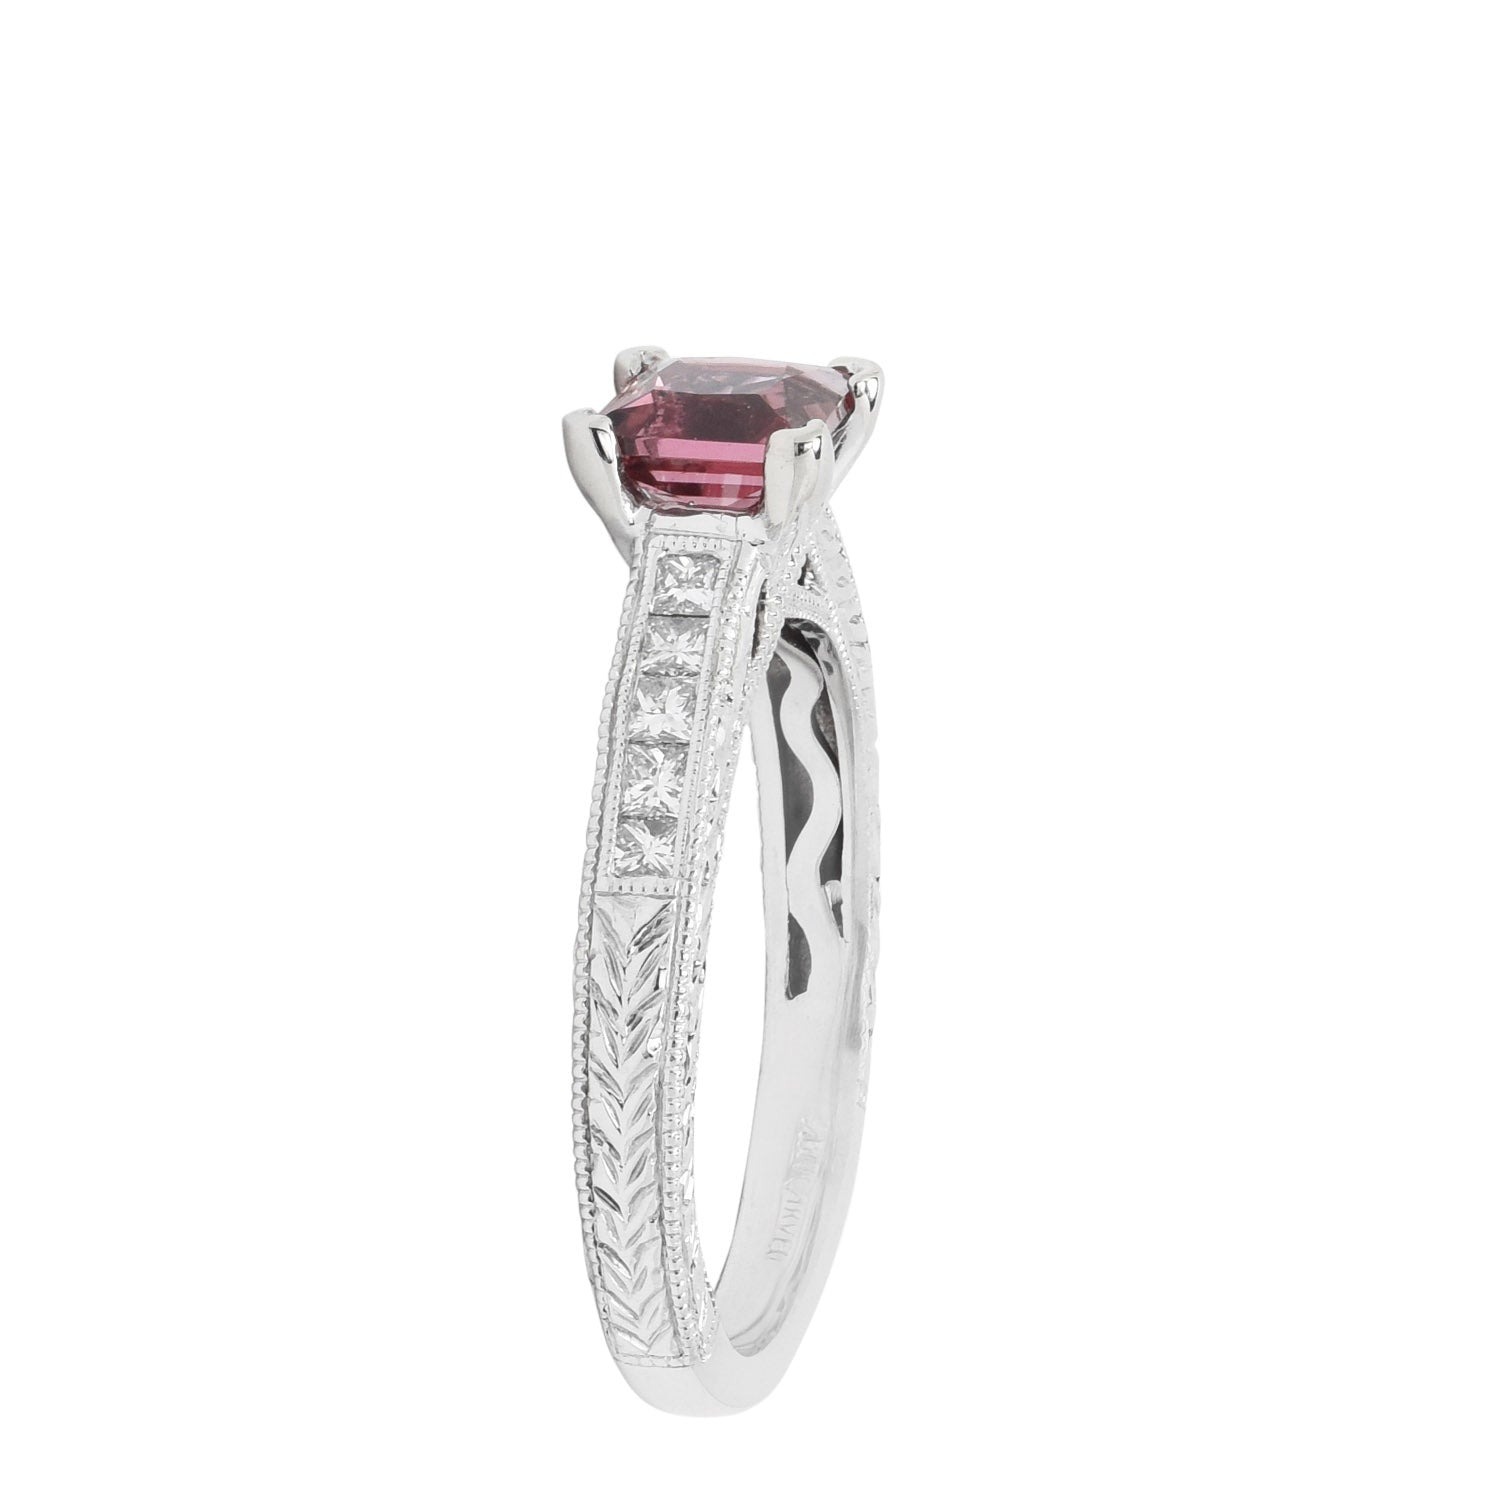 Maine Pink Tourmaline Ring in 14kt White Gold with Diamonds (1/4ct tw)